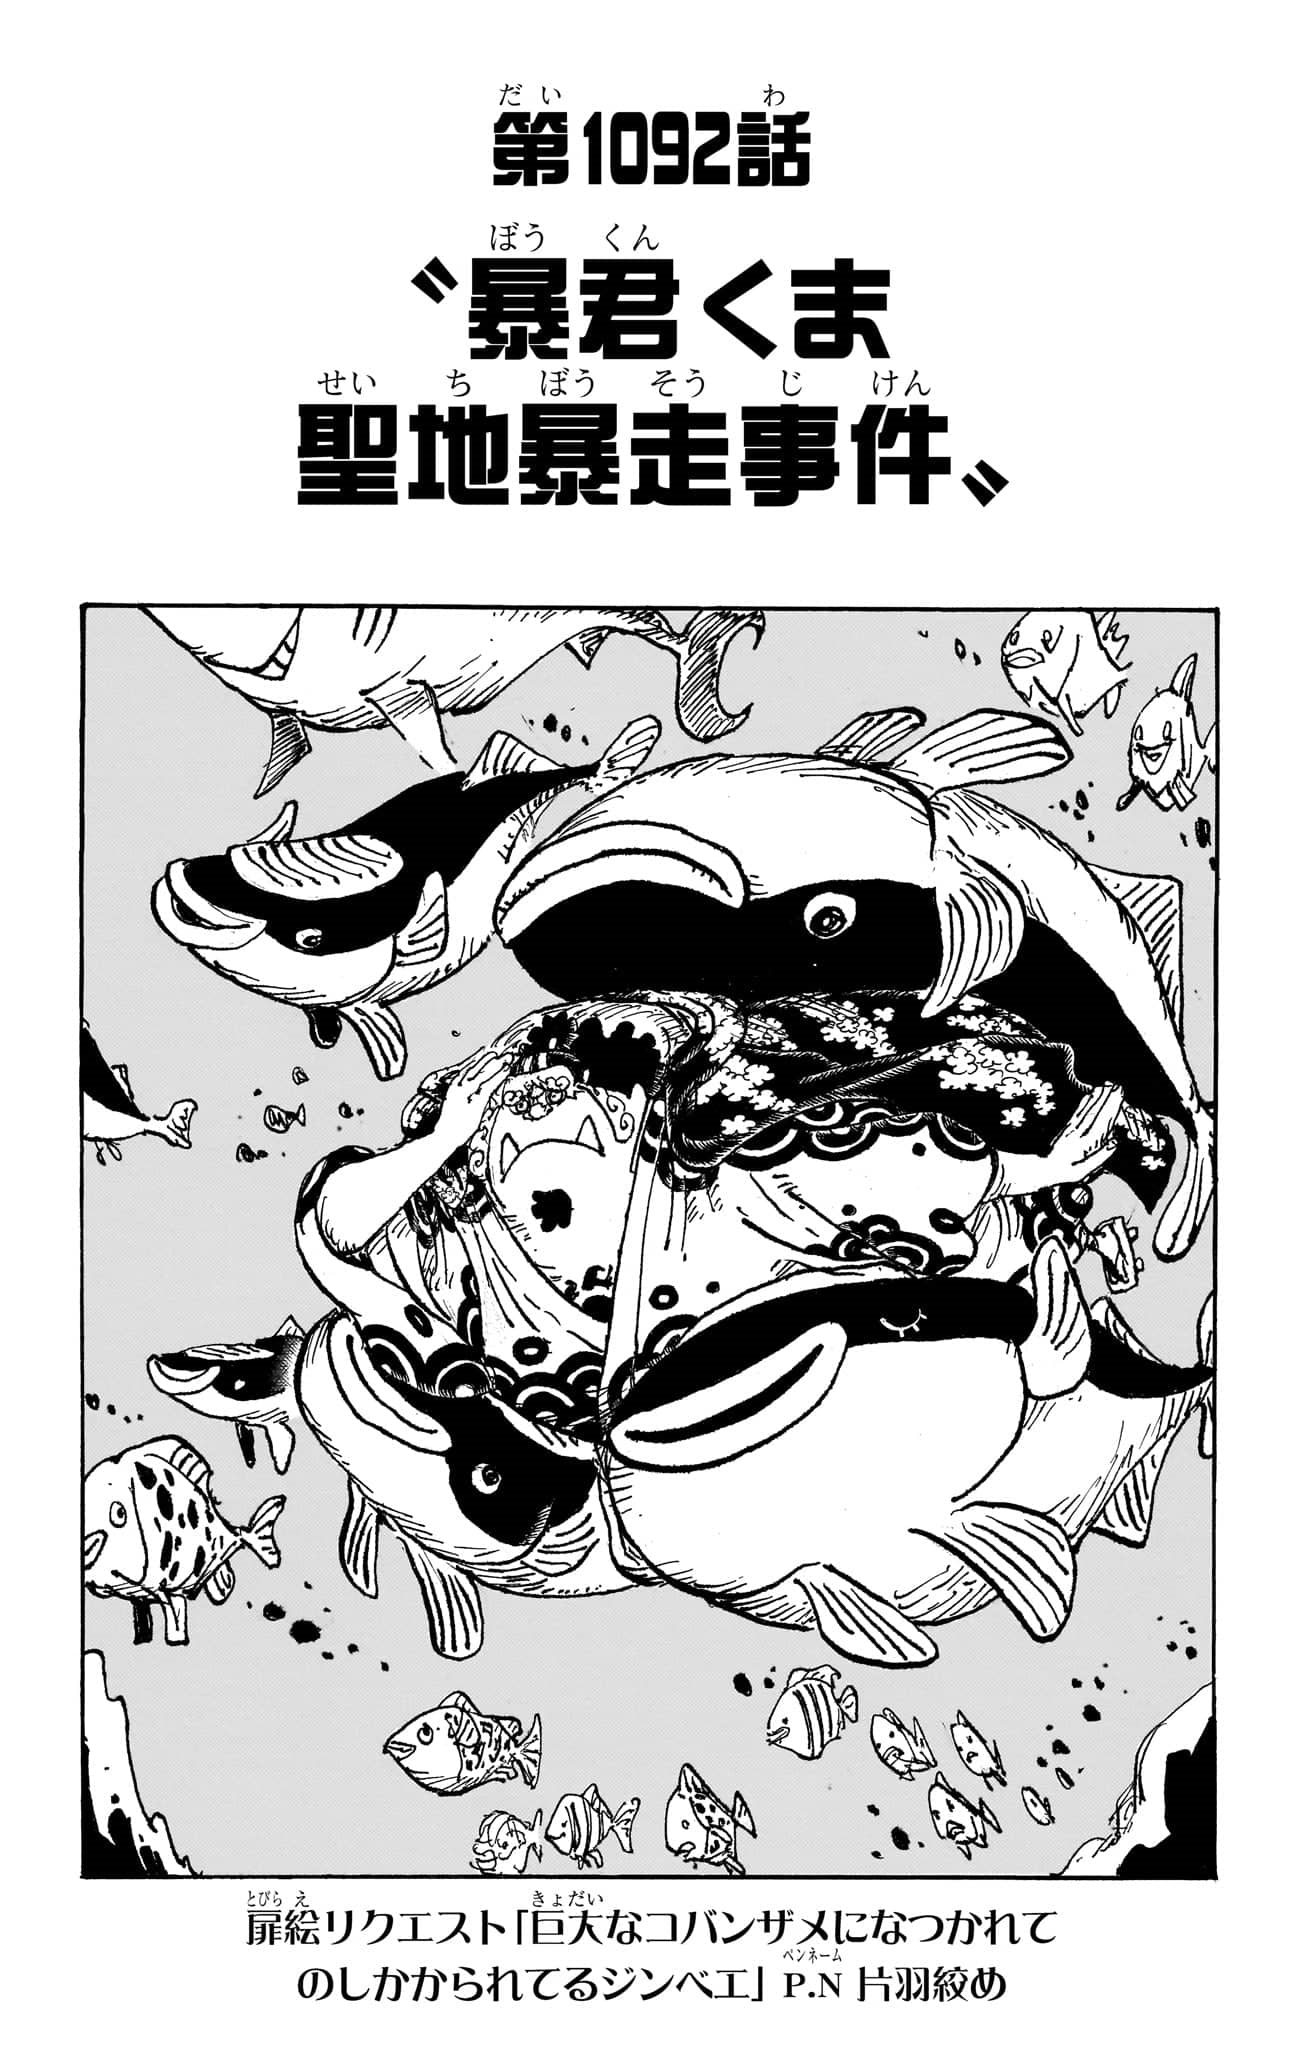 One Piece Manga Chapter 1,065 Spoilers, Raw Scans & Summary